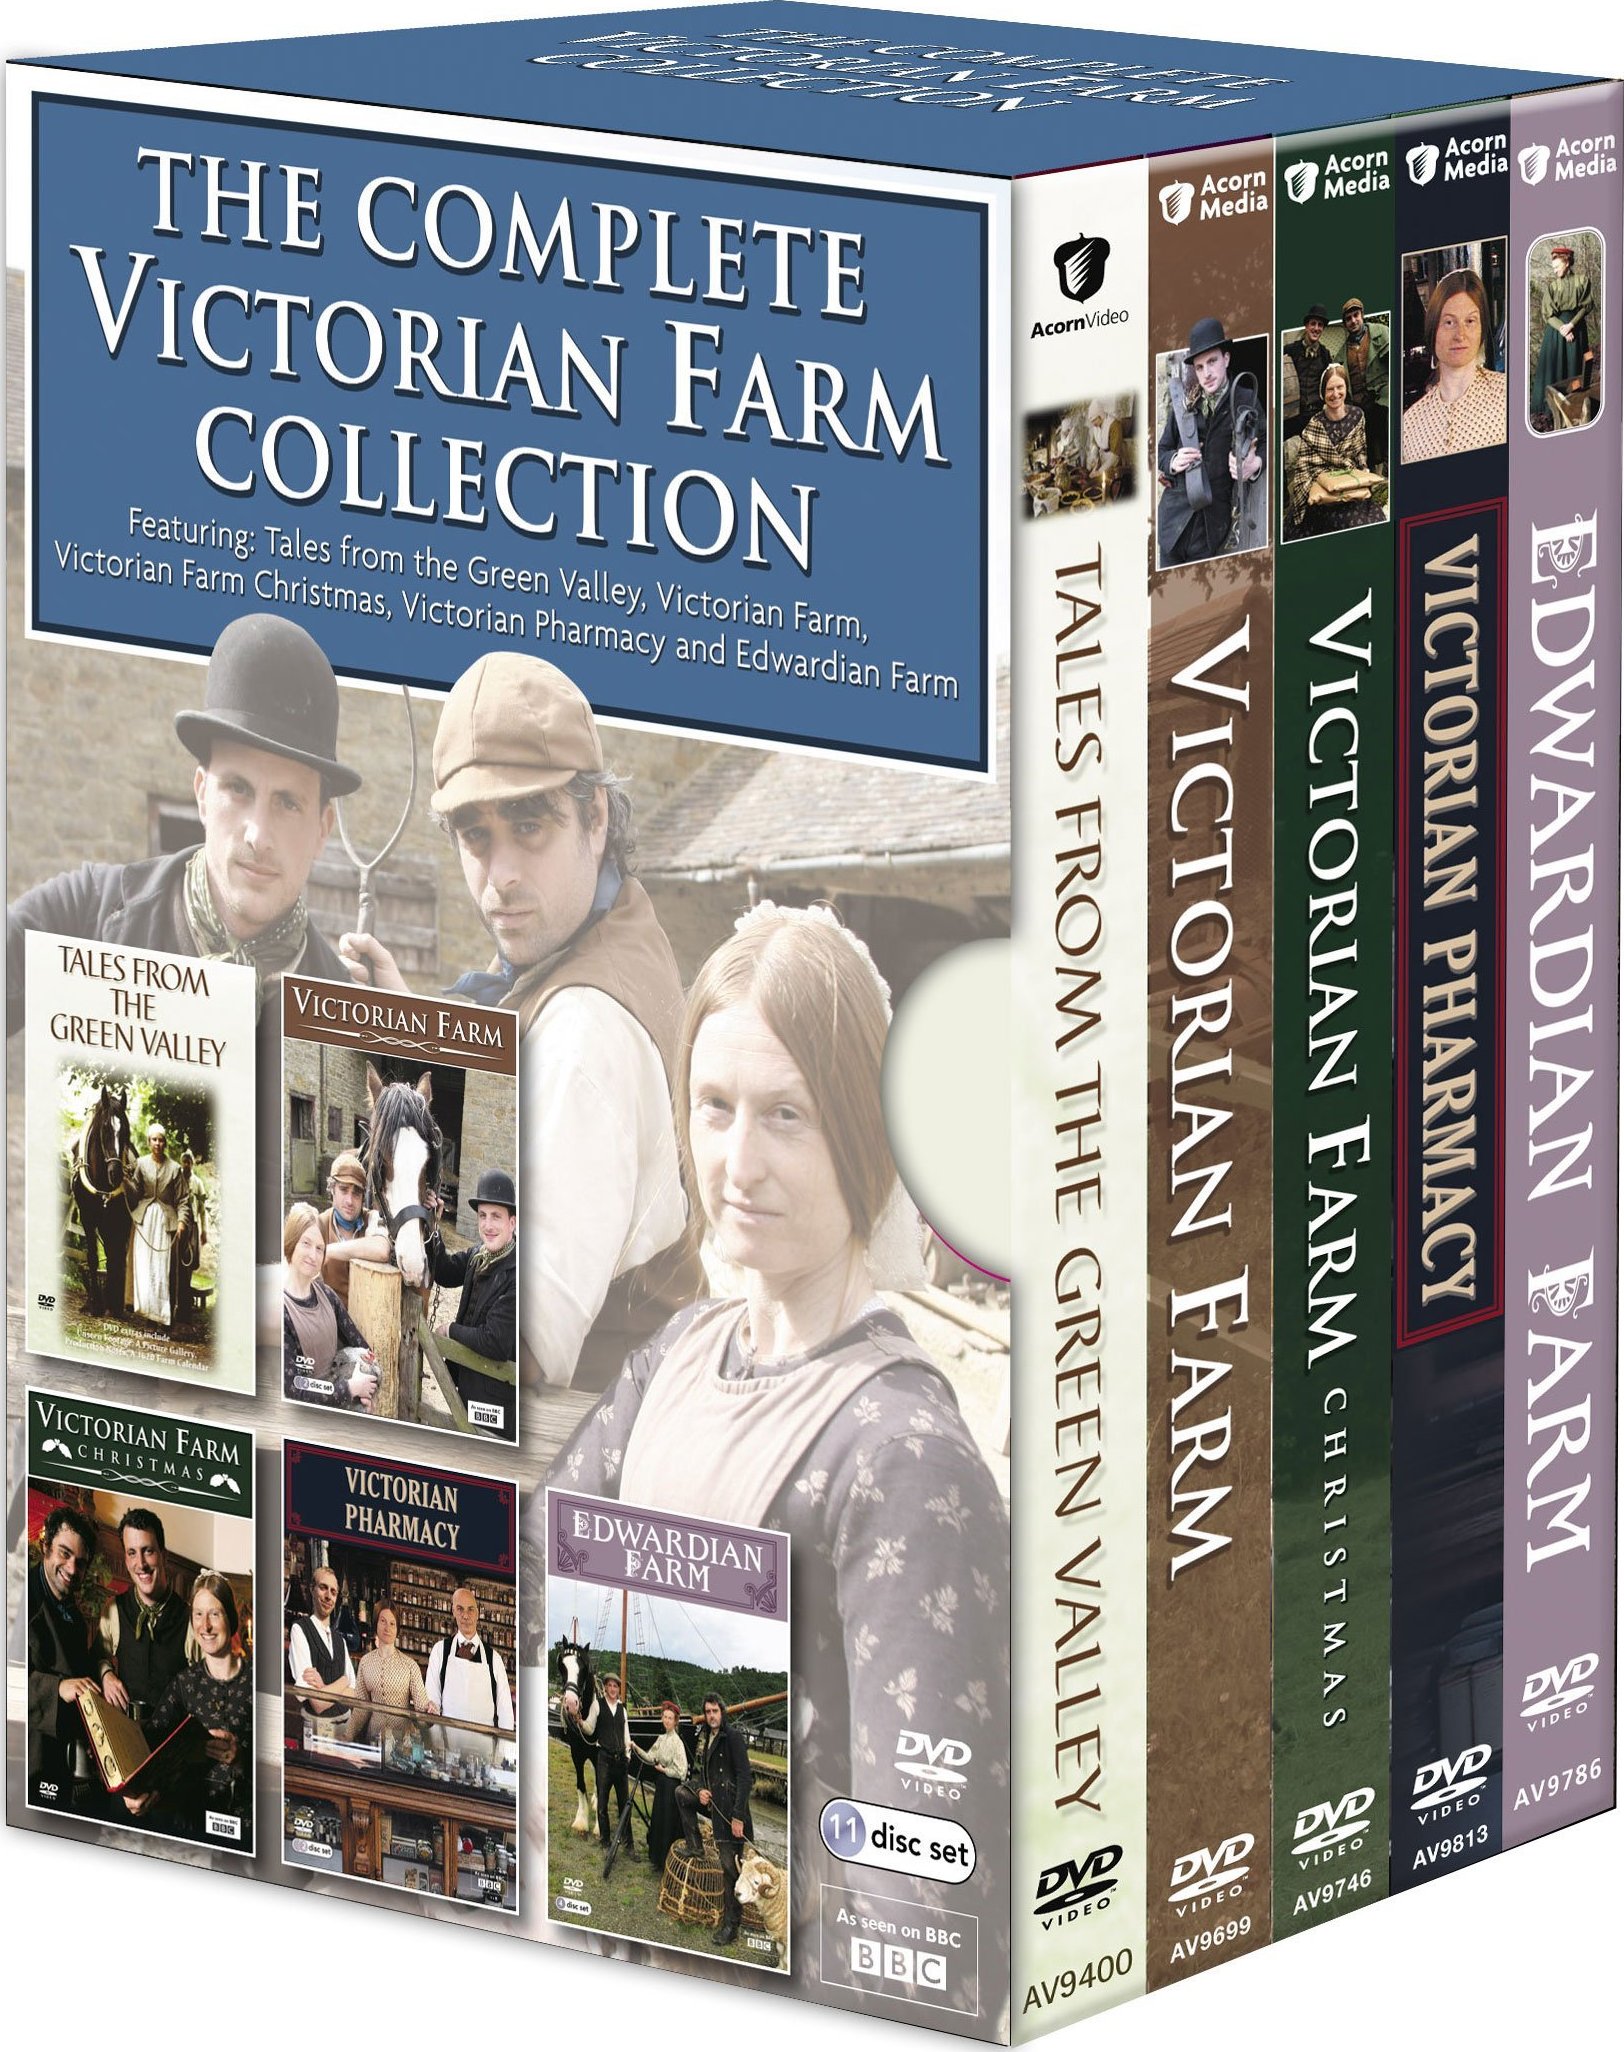 The Complete Victorian Farm Collection DVD (Tales from the Green